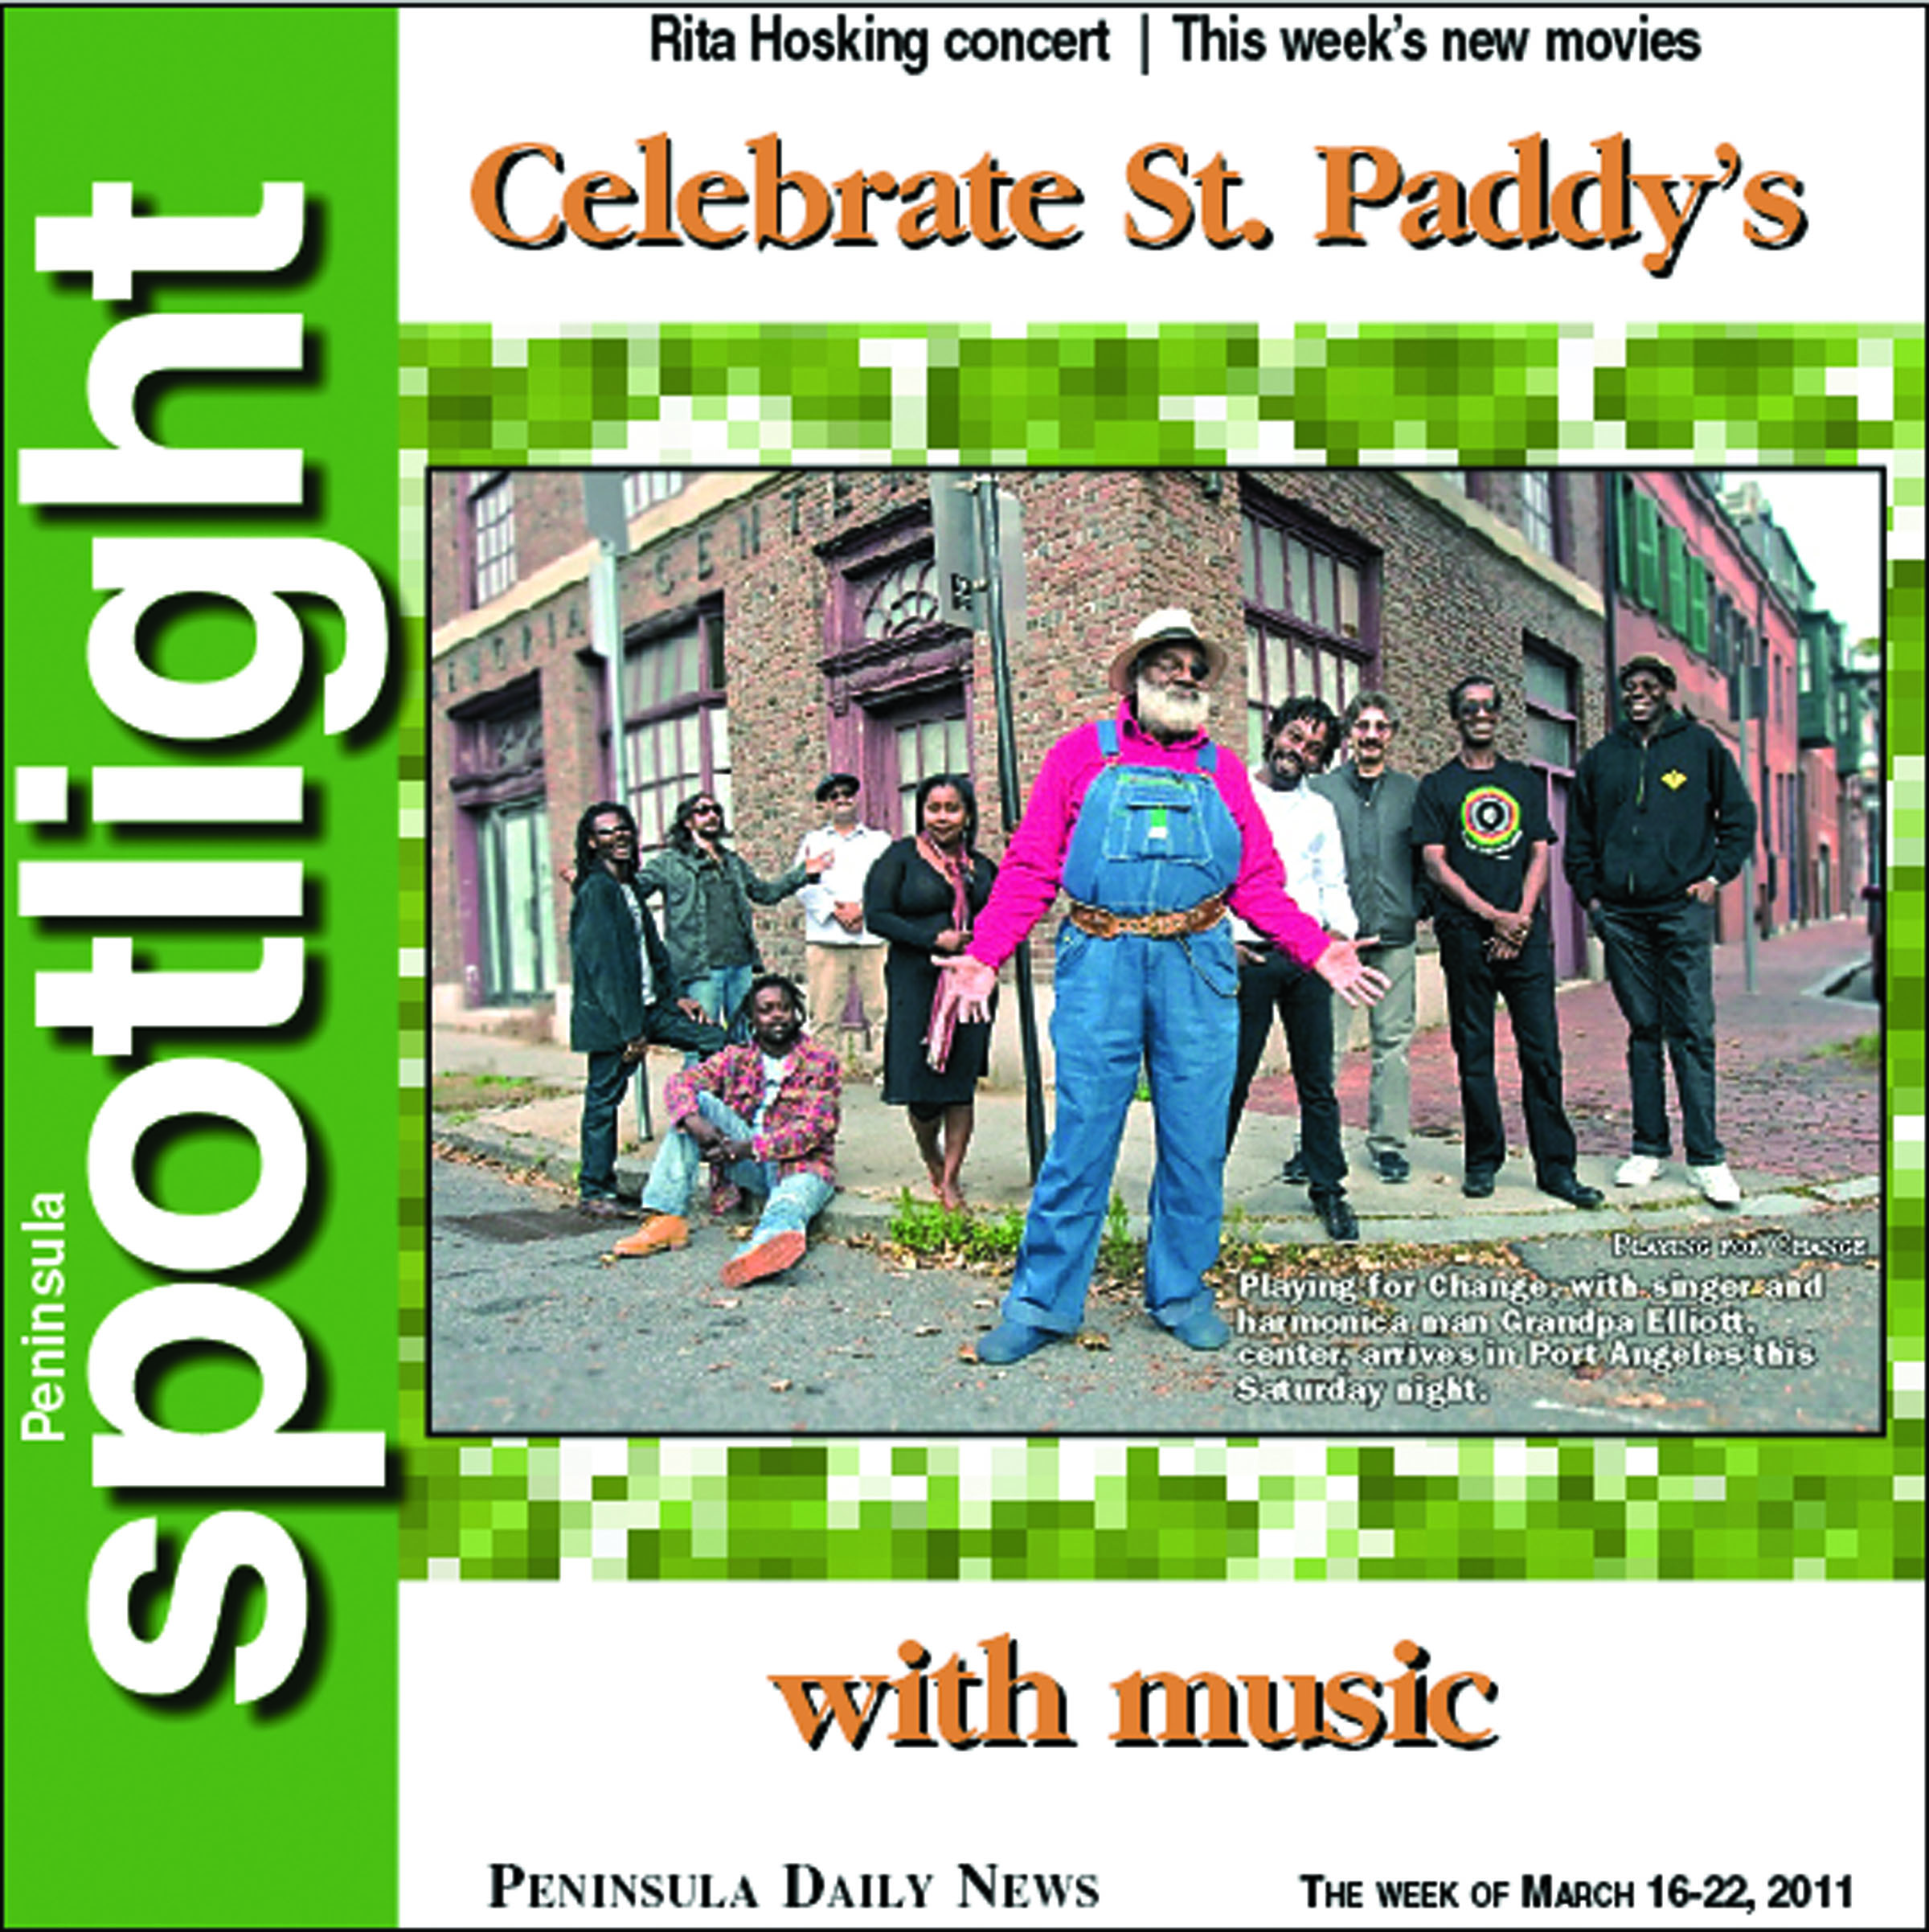 The noted band Playing for Change is one of the offerings across the North Olympic Peninsula for St. Patrick’s Day festivities tonight.  [Peninsula Spotlight cover design by Heather Loyd/Peninsula Daily News]